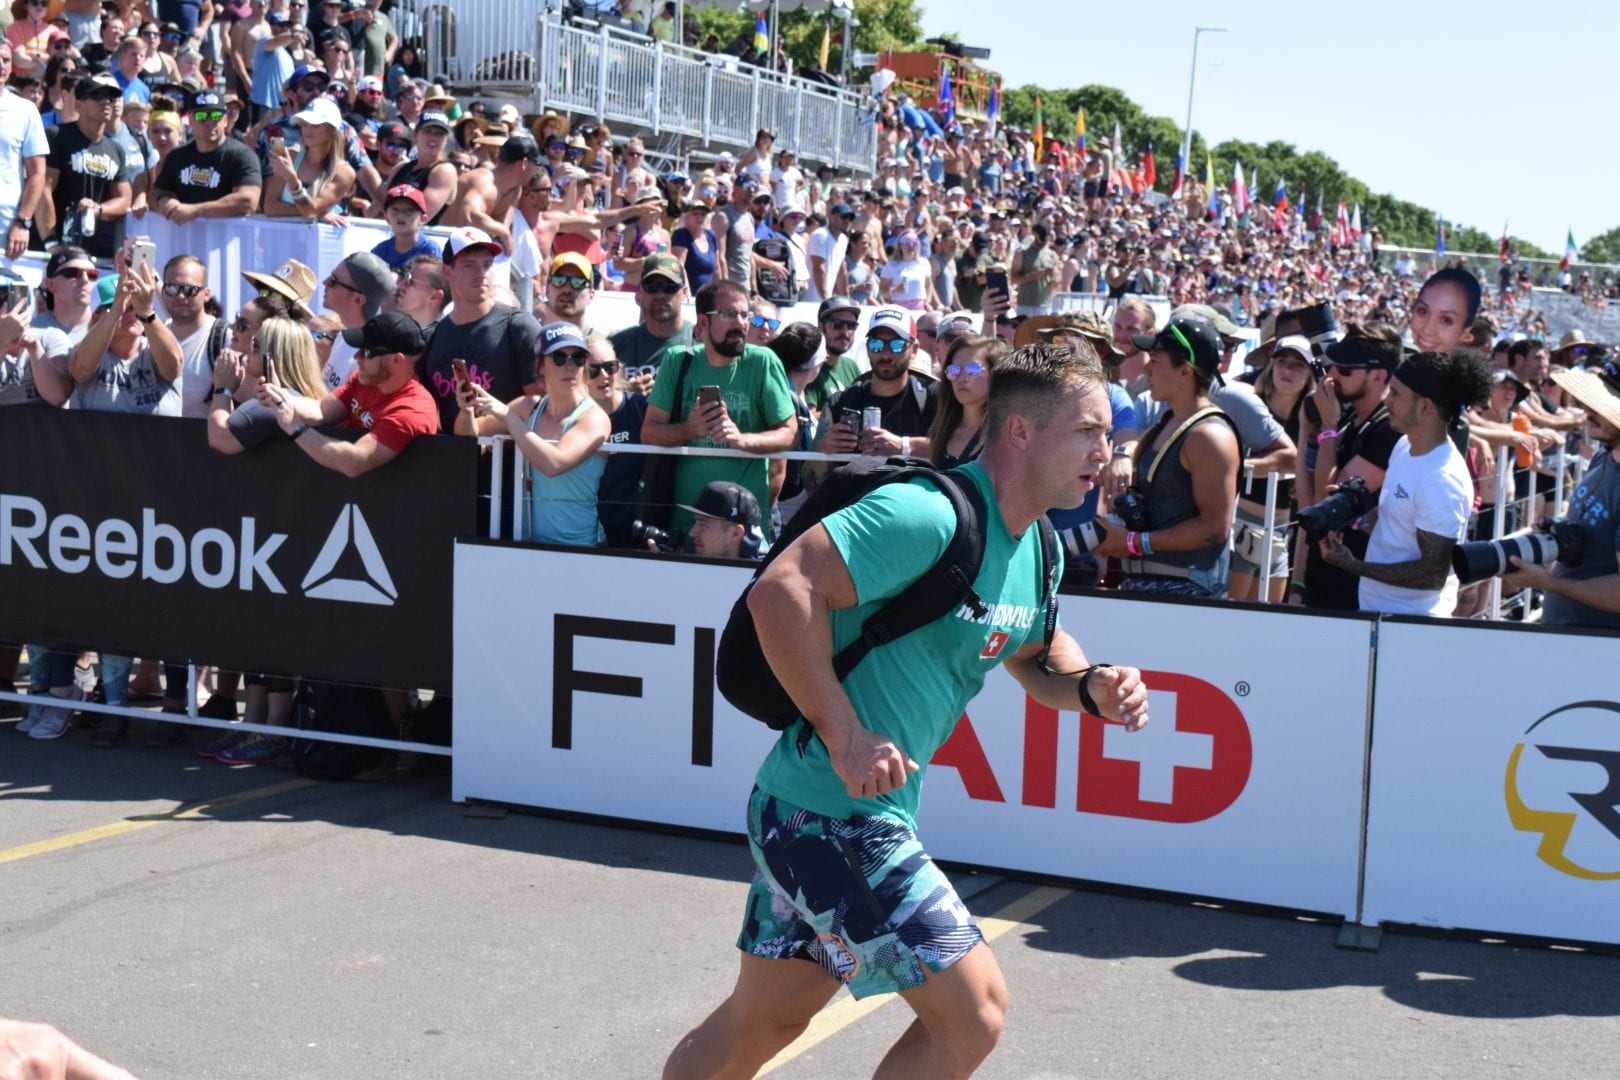 Adrian Mundwiler completes the Ruck Run event at the 2019 CrossFit Games.